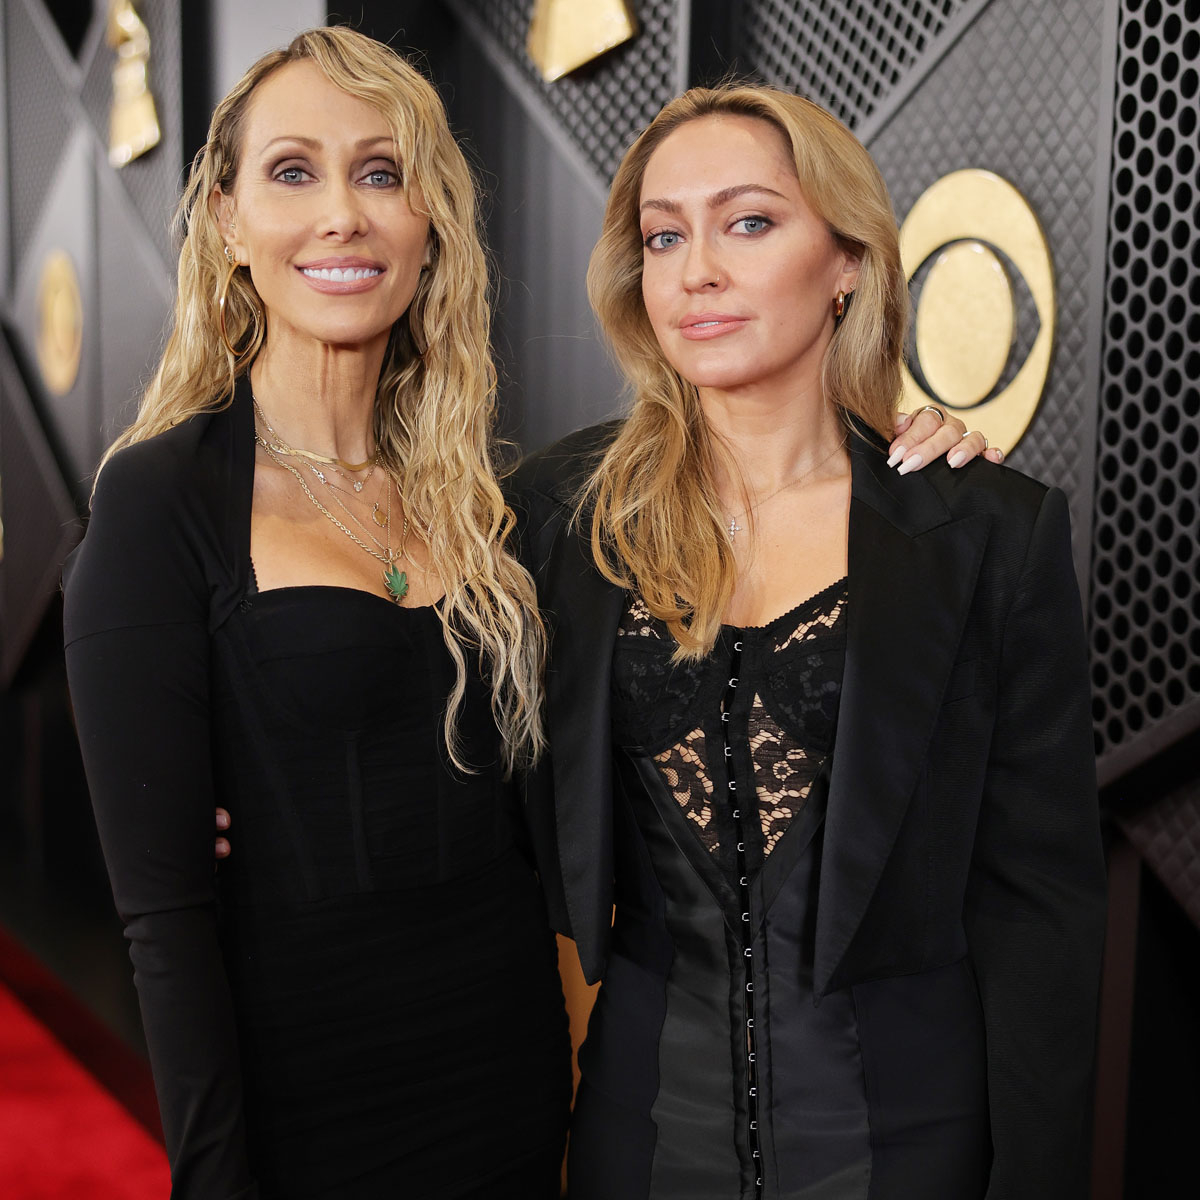 Why Brandi Cyrus Says Mom Tish Cyrus Is in Her "Unapologetic" Era